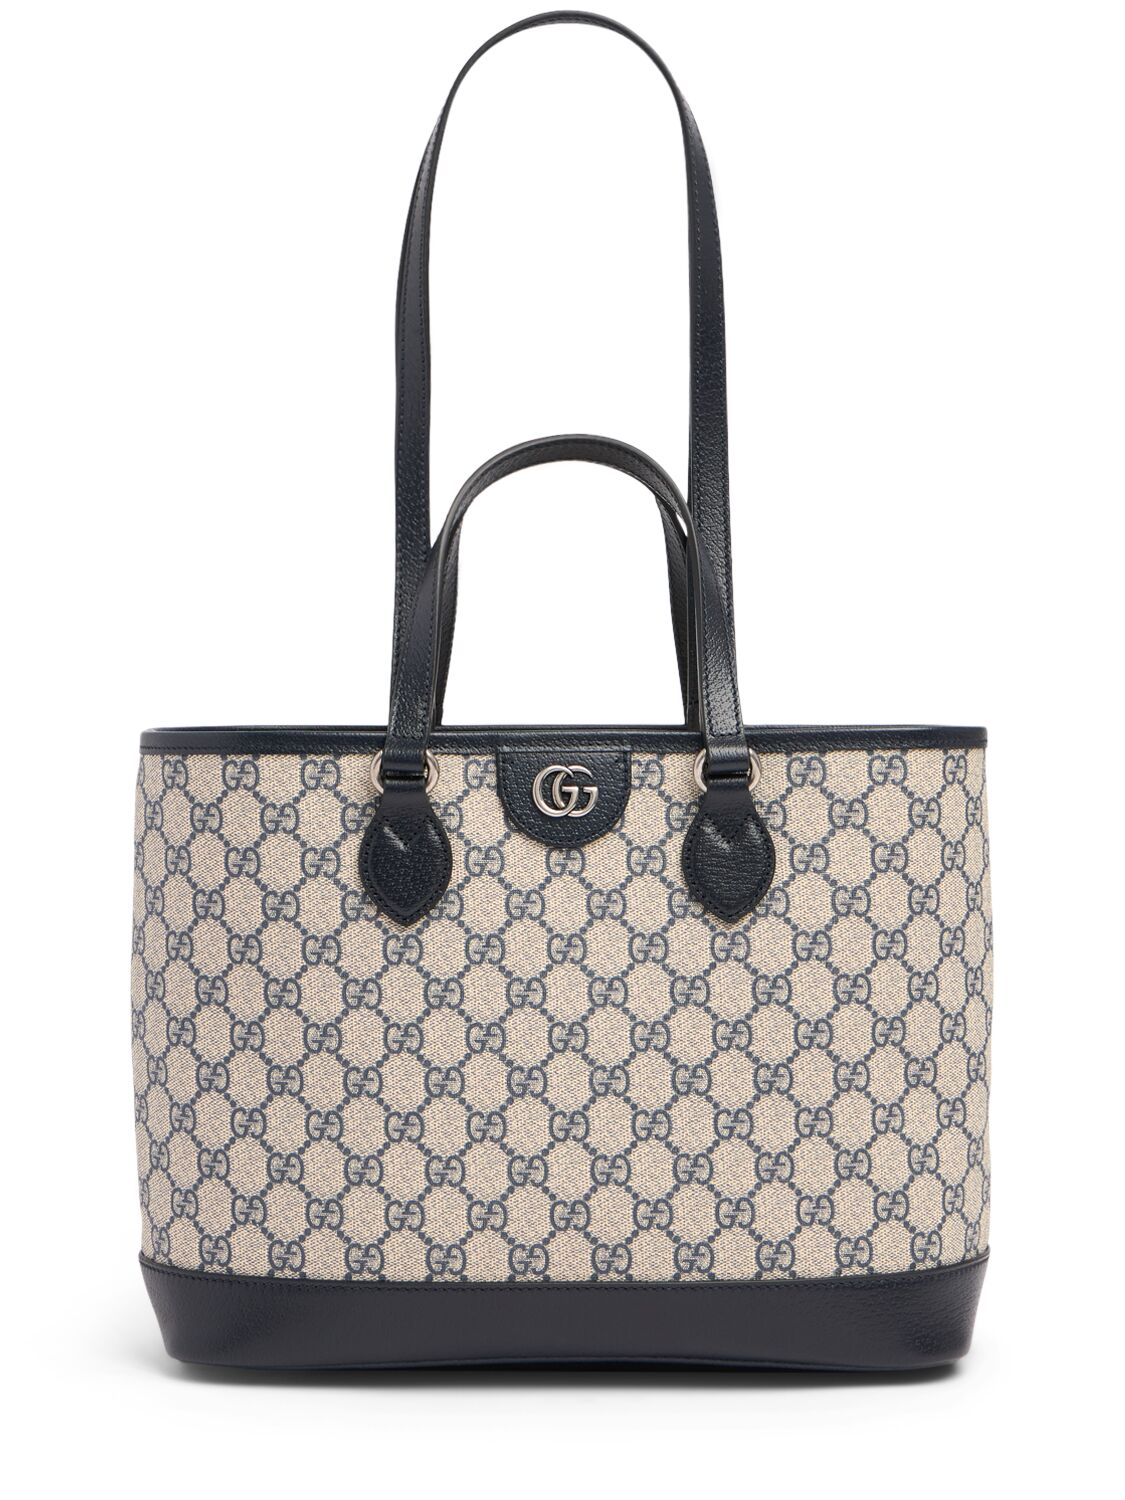 Gucci Ophidia Canvas Tote Bag In Black